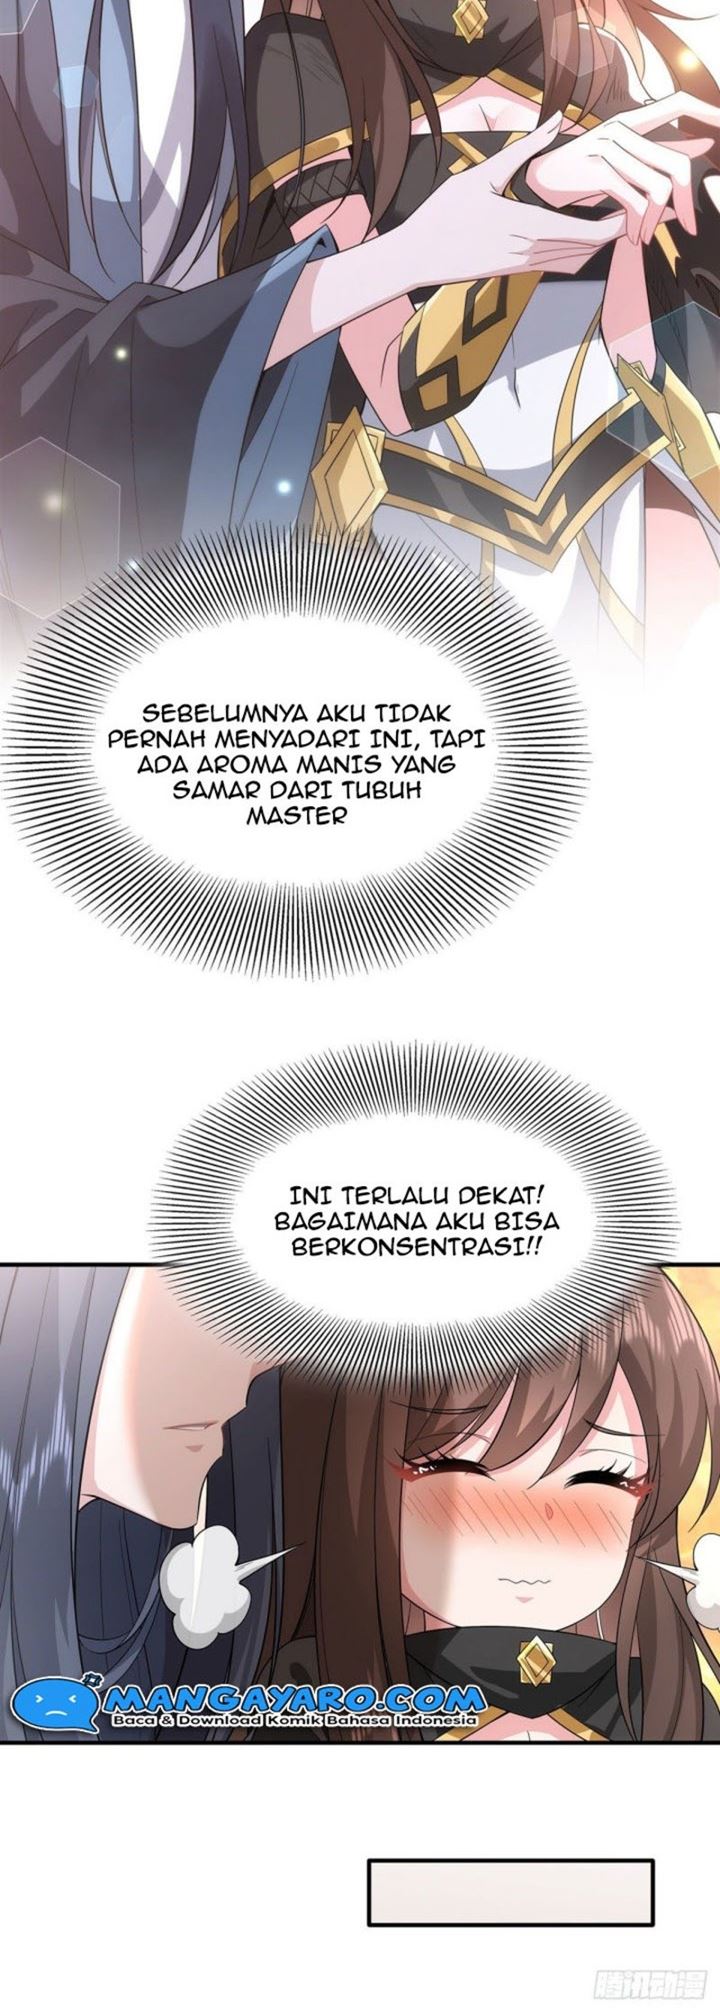 Dilarang COPAS - situs resmi www.mangacanblog.com - Komik my female apprentices are all big shots from the future 021 - chapter 21 22 Indonesia my female apprentices are all big shots from the future 021 - chapter 21 Terbaru 25|Baca Manga Komik Indonesia|Mangacan